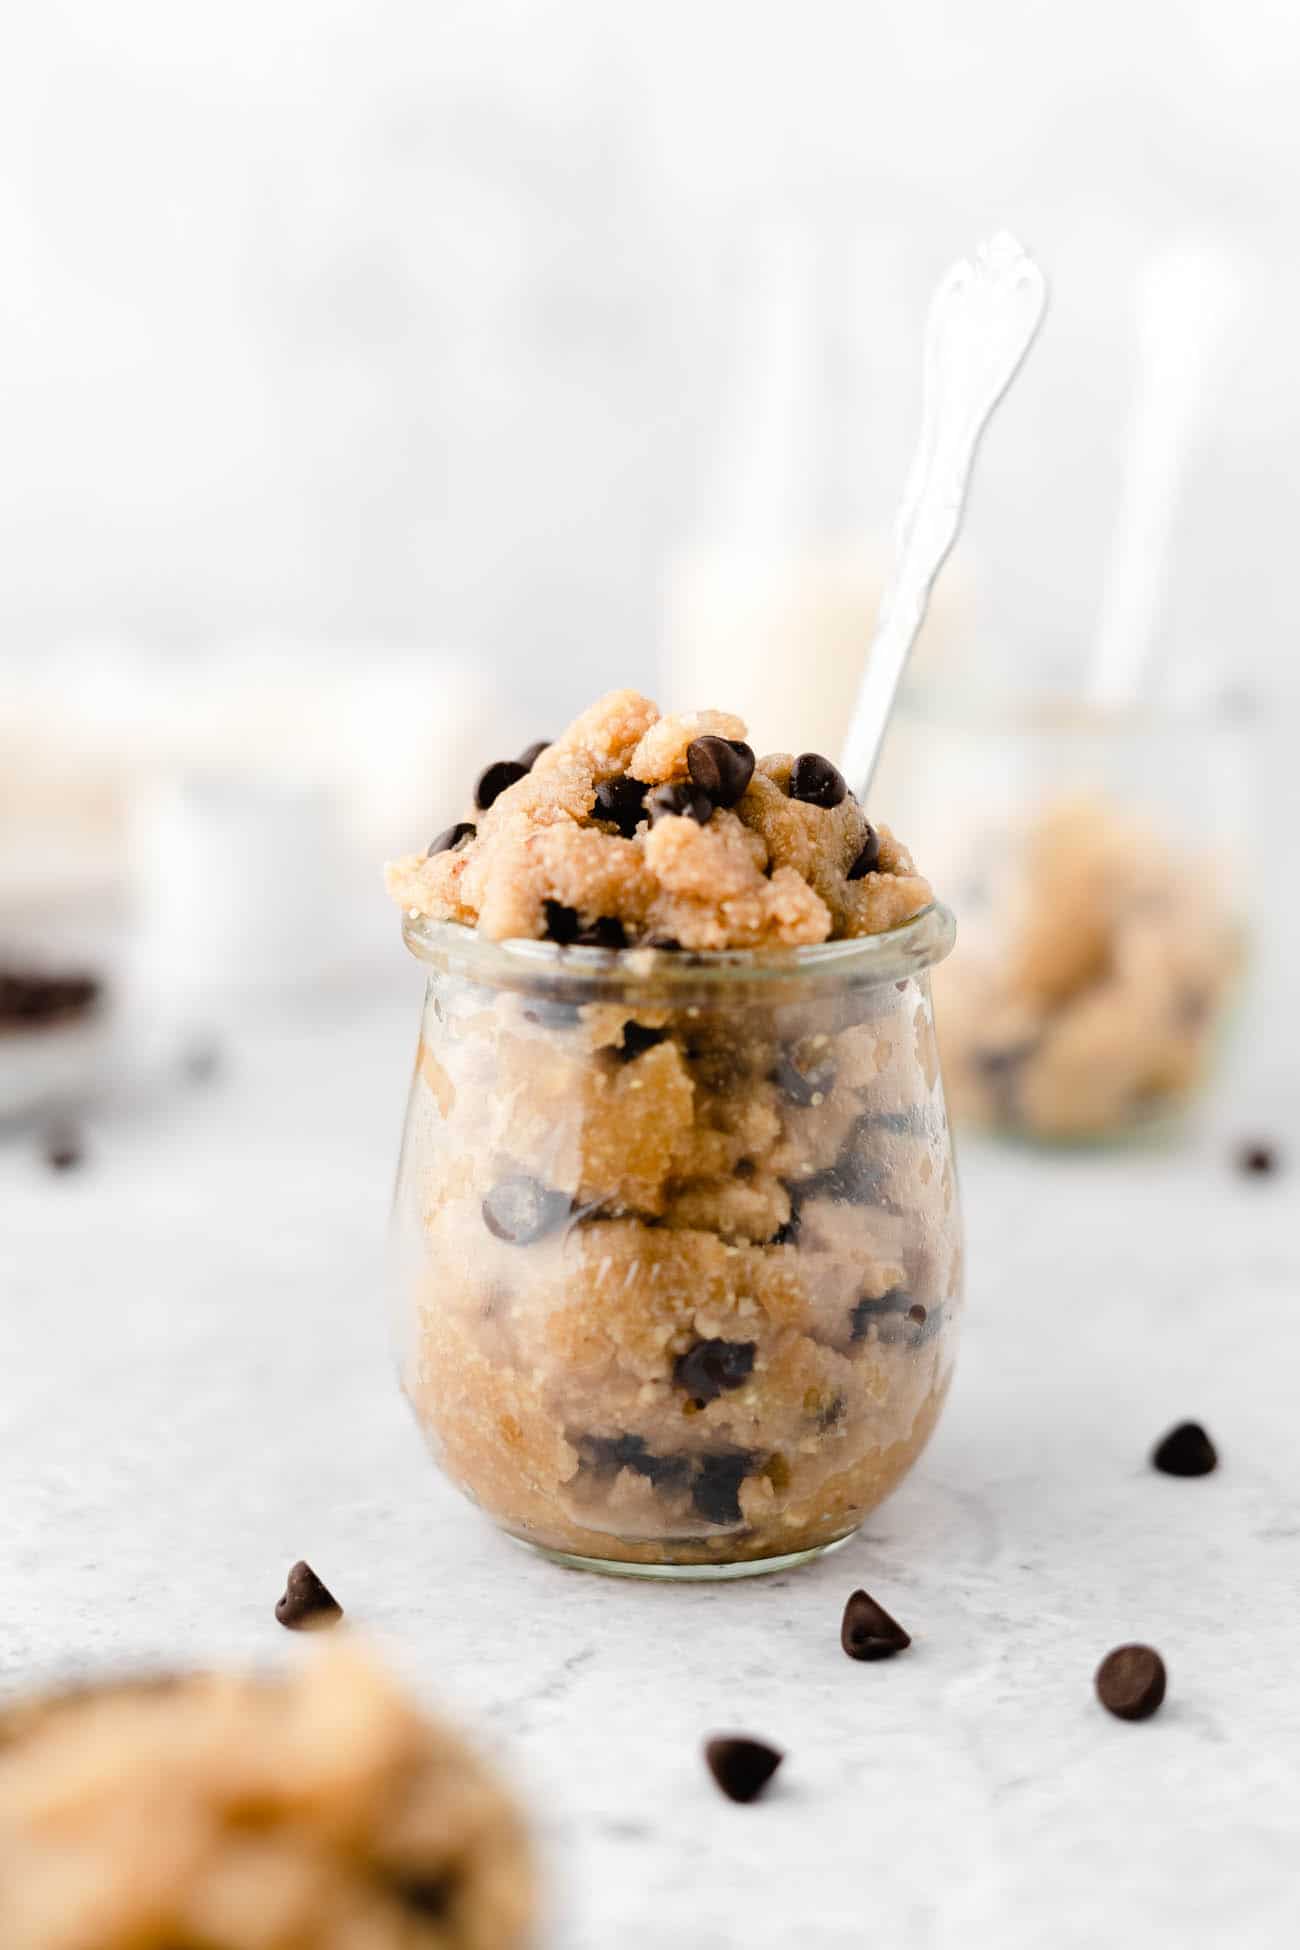 Healthy Edible Cookie Dough Vegan, Gluten Free   The Picky Eater